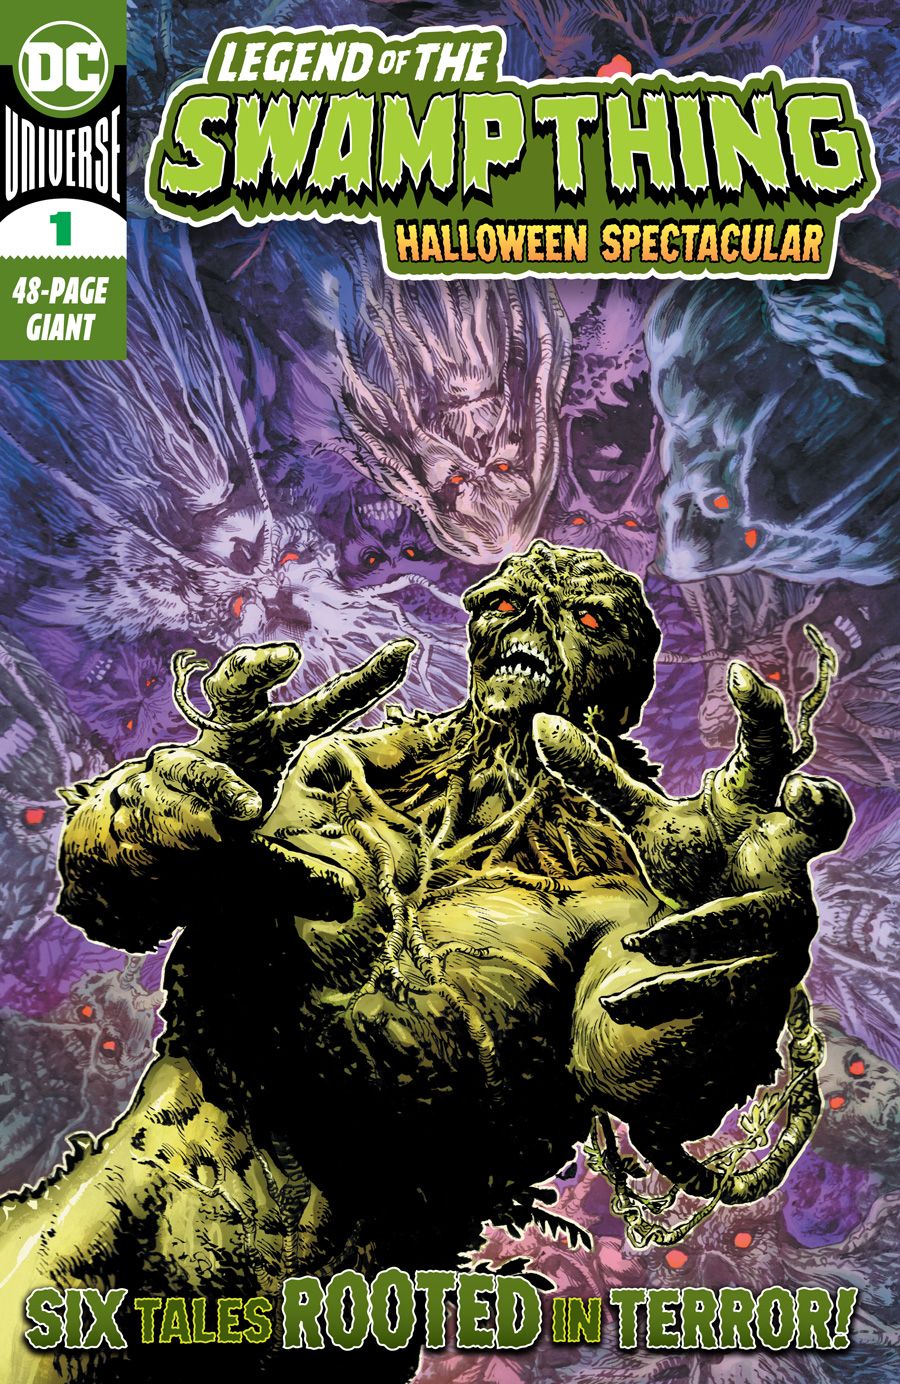 Legend of the Swamp Thing Halloween Spectacular #1 Comic